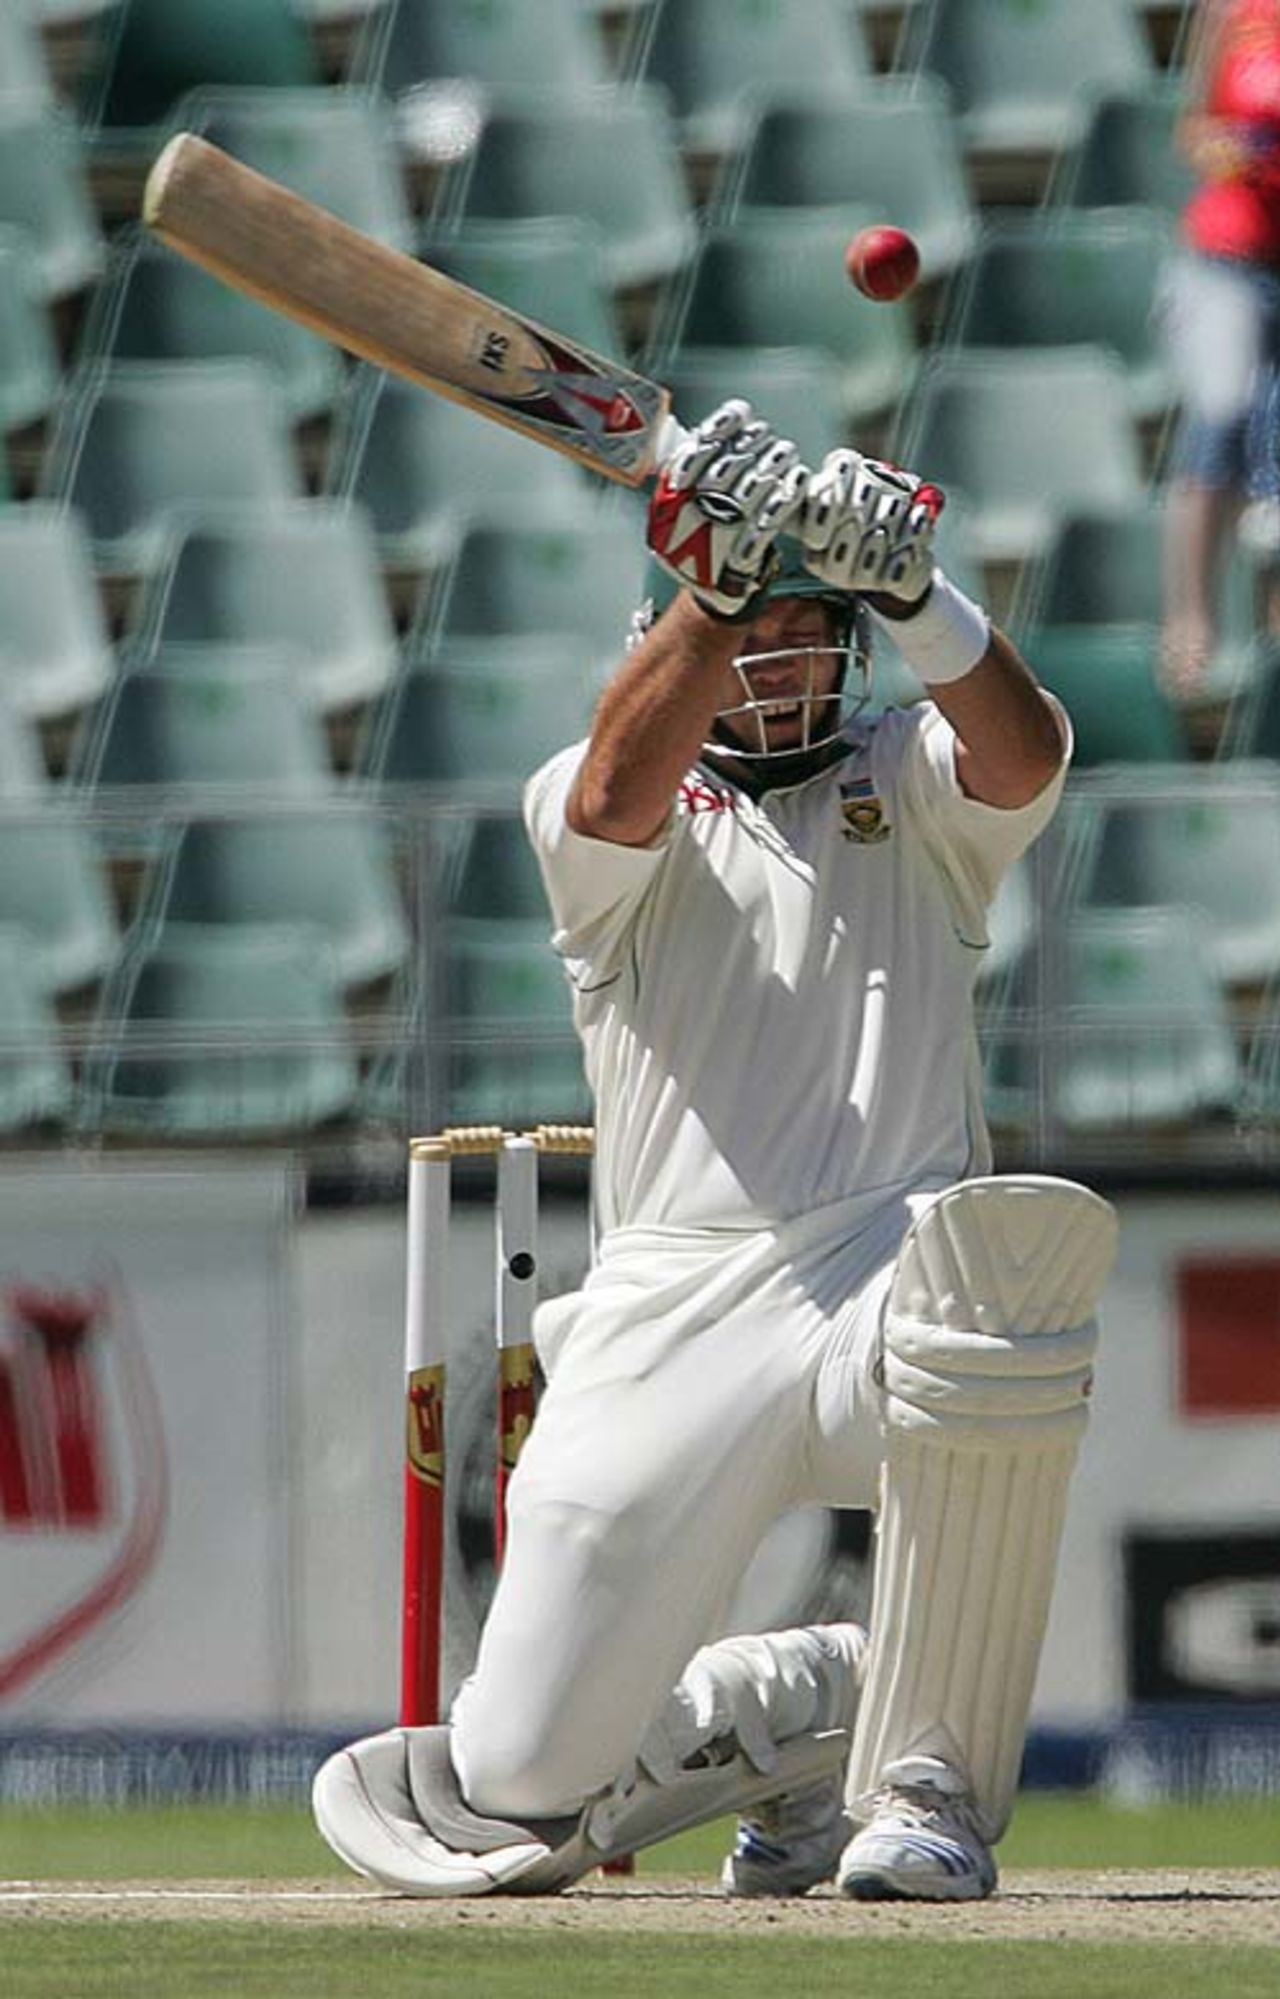 Jacques Kallis appears to be in two minds over ducking a delivery, 1st Test, Johannesburg, 3rd day, November 10, 2007